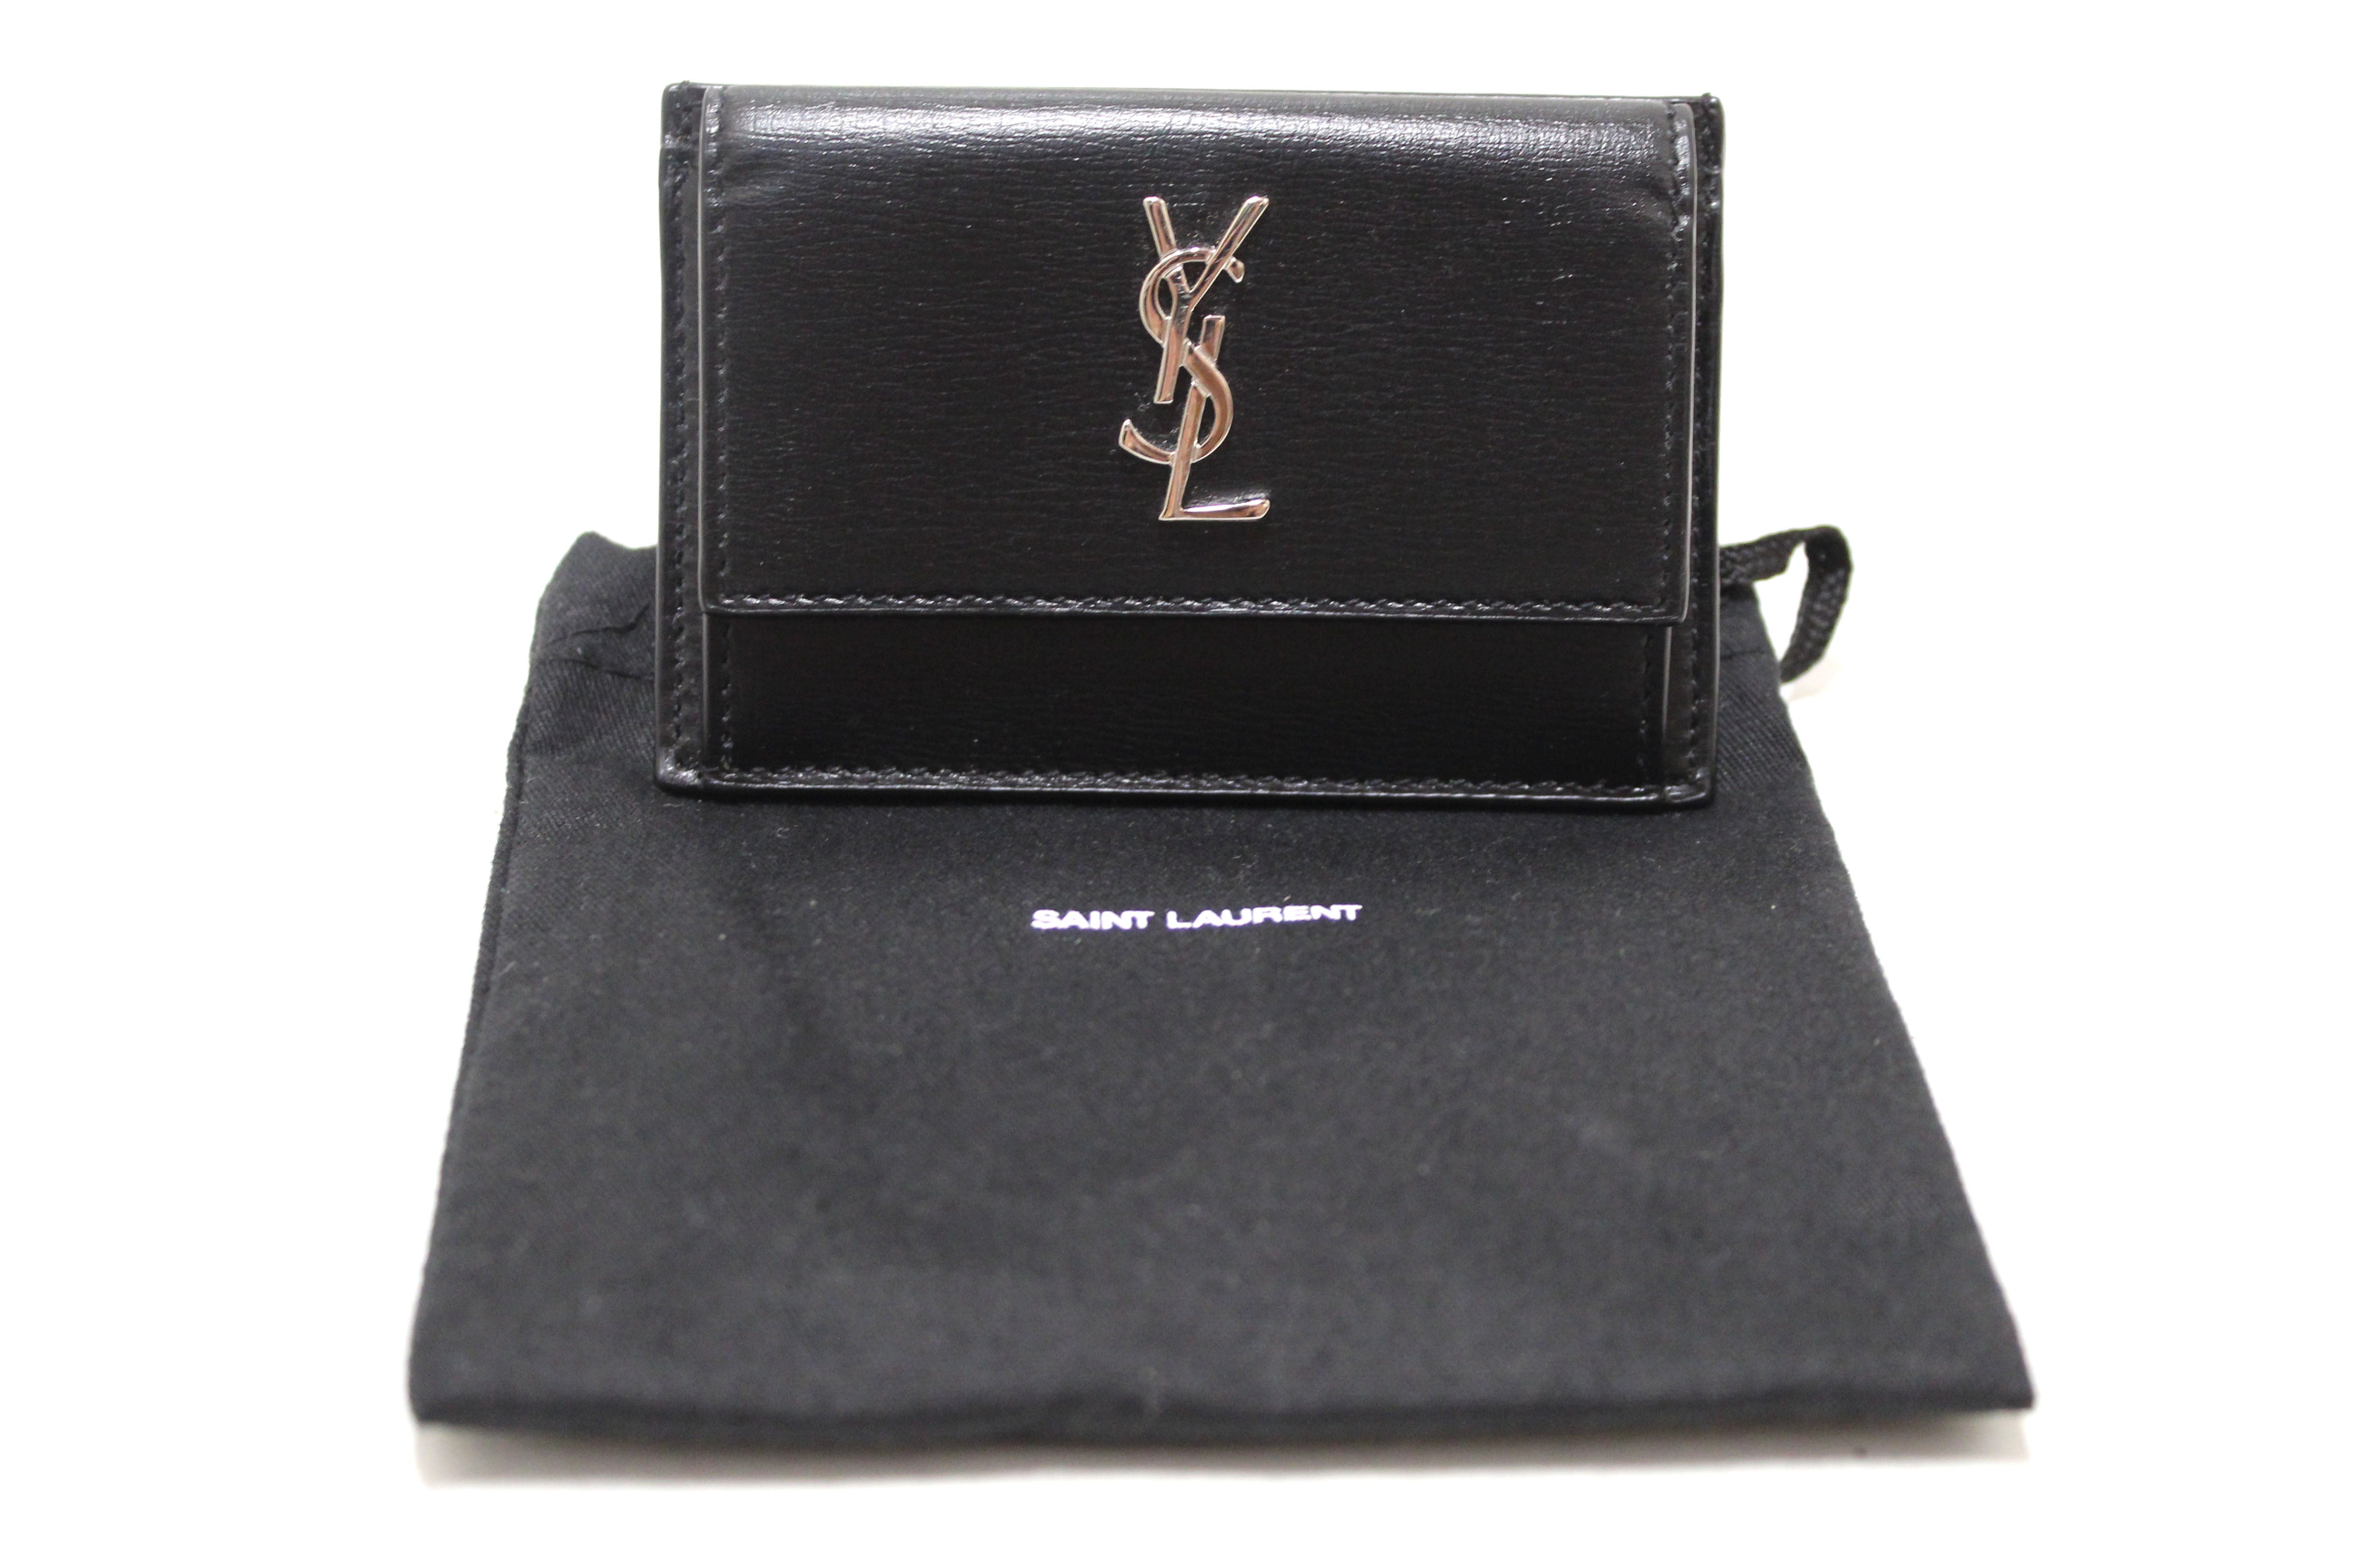 Authentic Saint Laurent Black Smooth Shiny Calfskin Leather Uptown Card Case